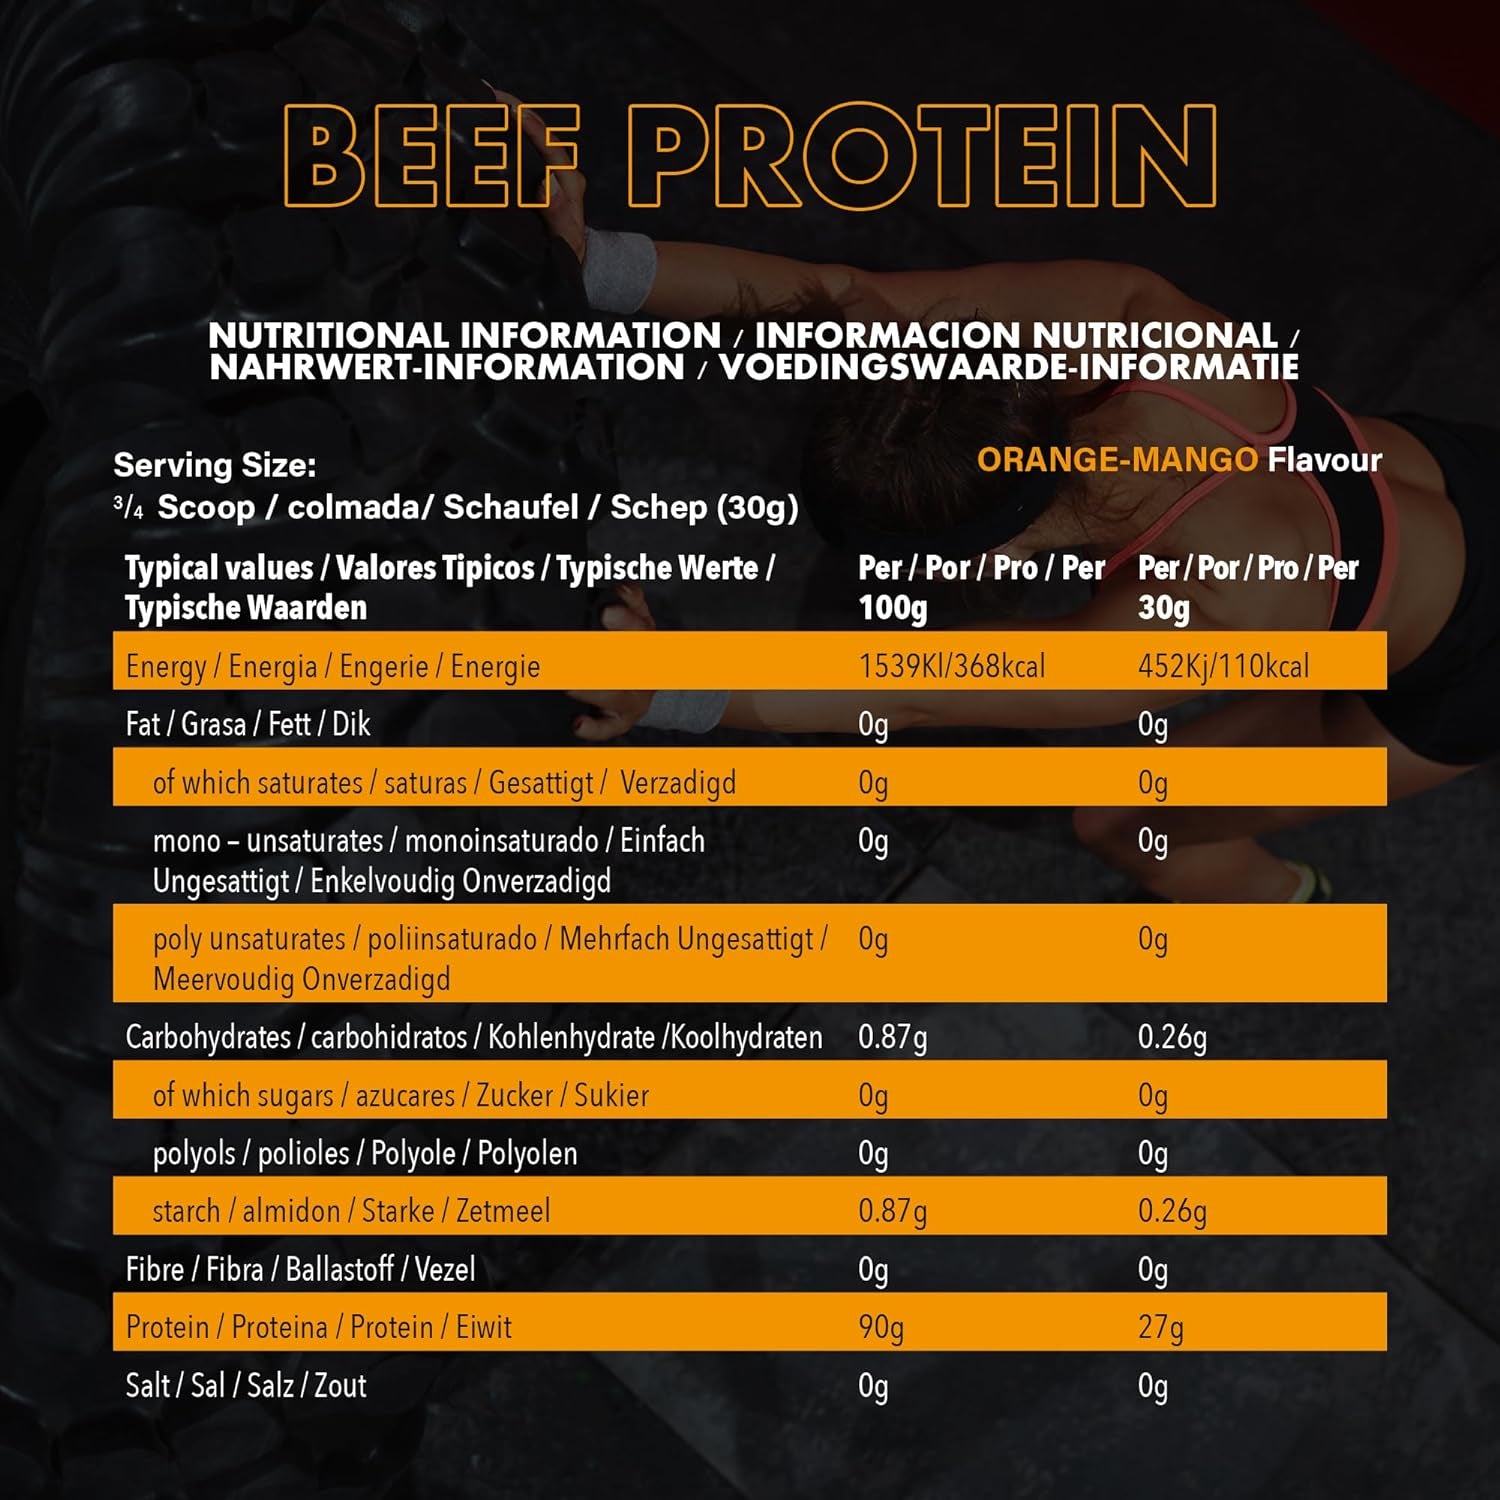 Beef Protein Isolate Powder - Protein Powder High in Natural Amino Acids - Paleo, Keto Friendly - Dairy and Gluten Free - Muscle Recovery | 1.8Kg (Mango & Orange)